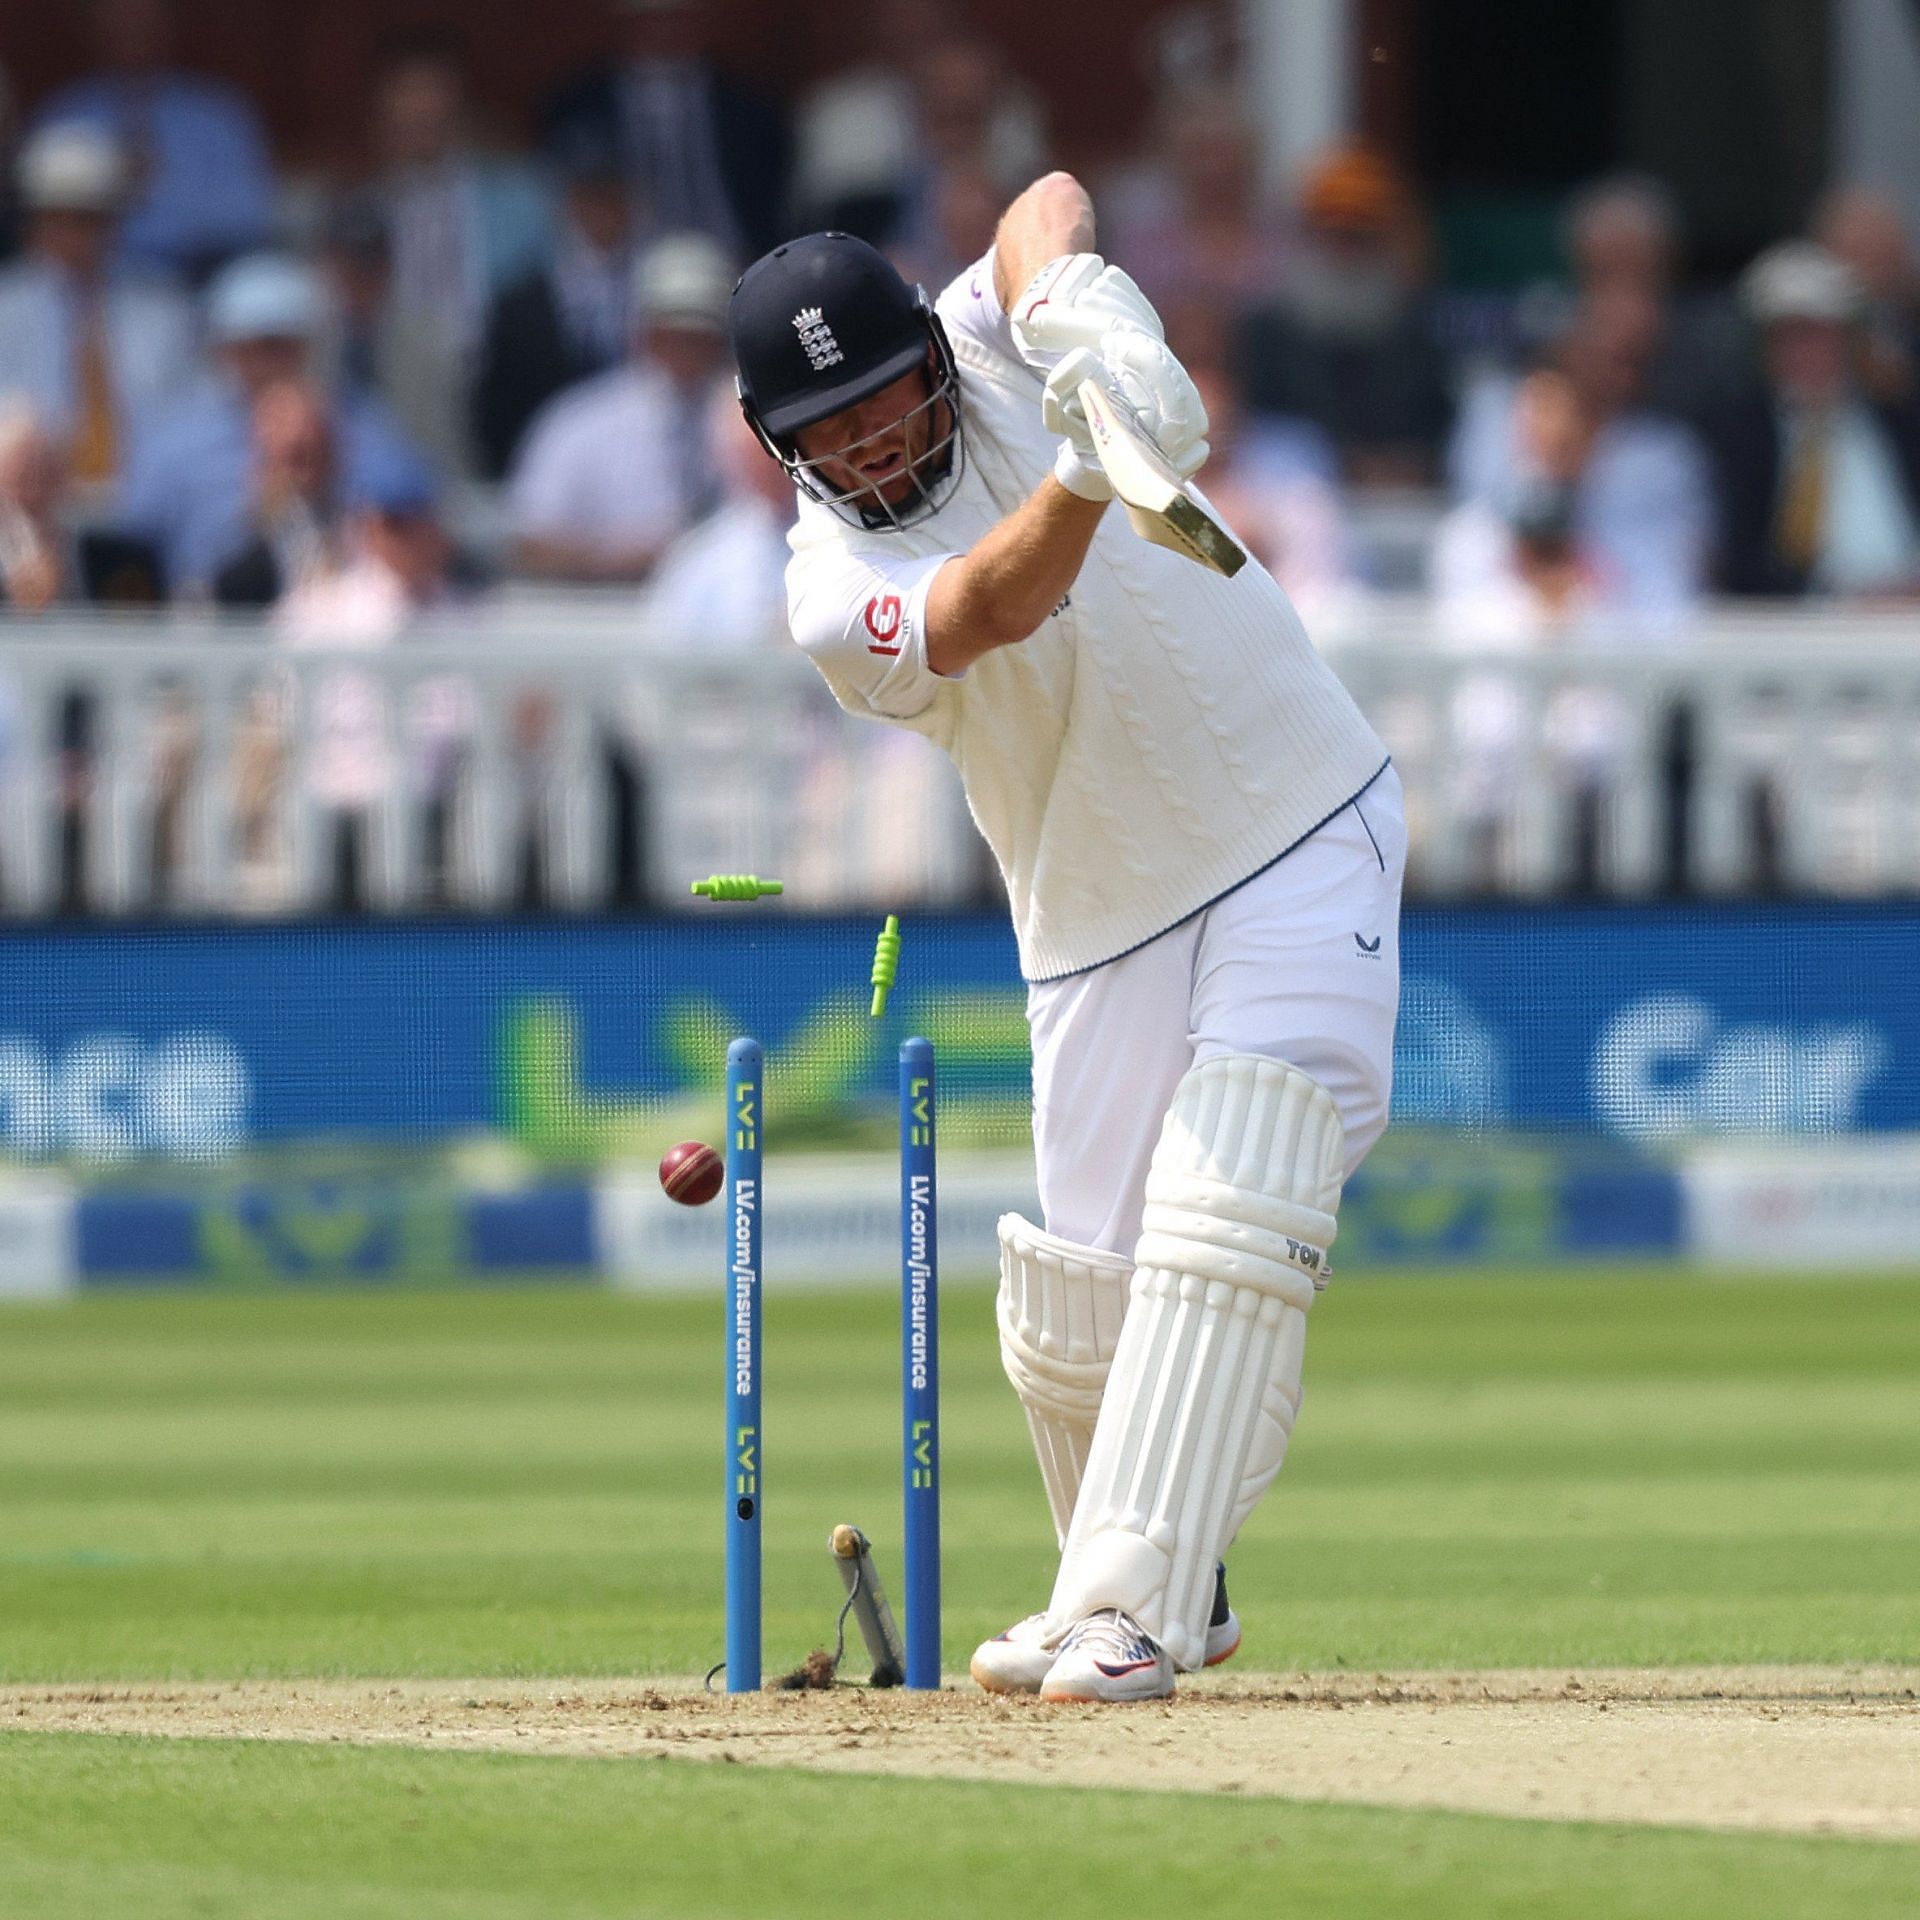 Anrich Nortje cleans up Jonny Bairstow as England are left reeling at lunch on Day One of the first Test.